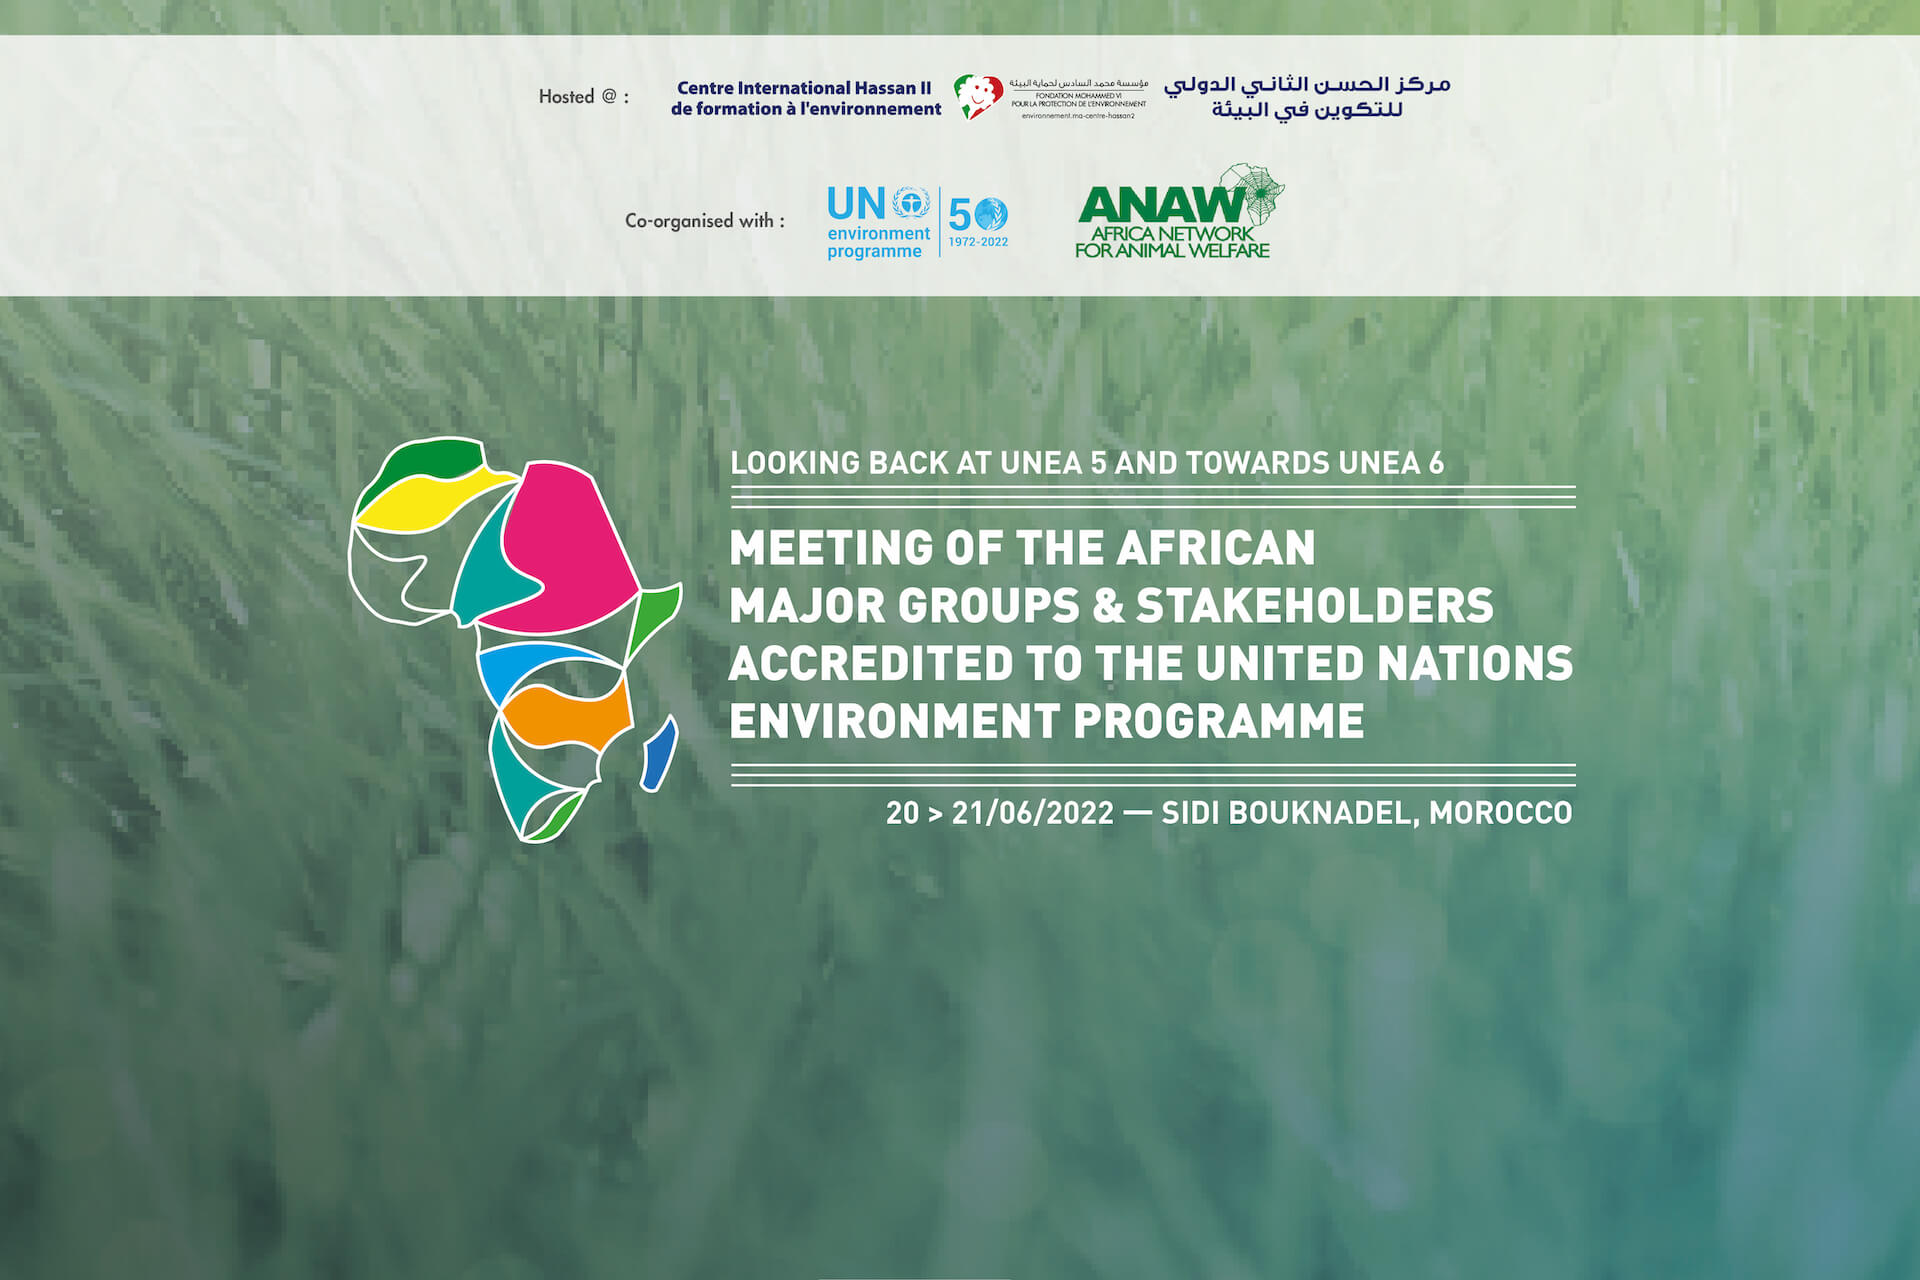 African Civil Society Organizations Working for Environmental Protection